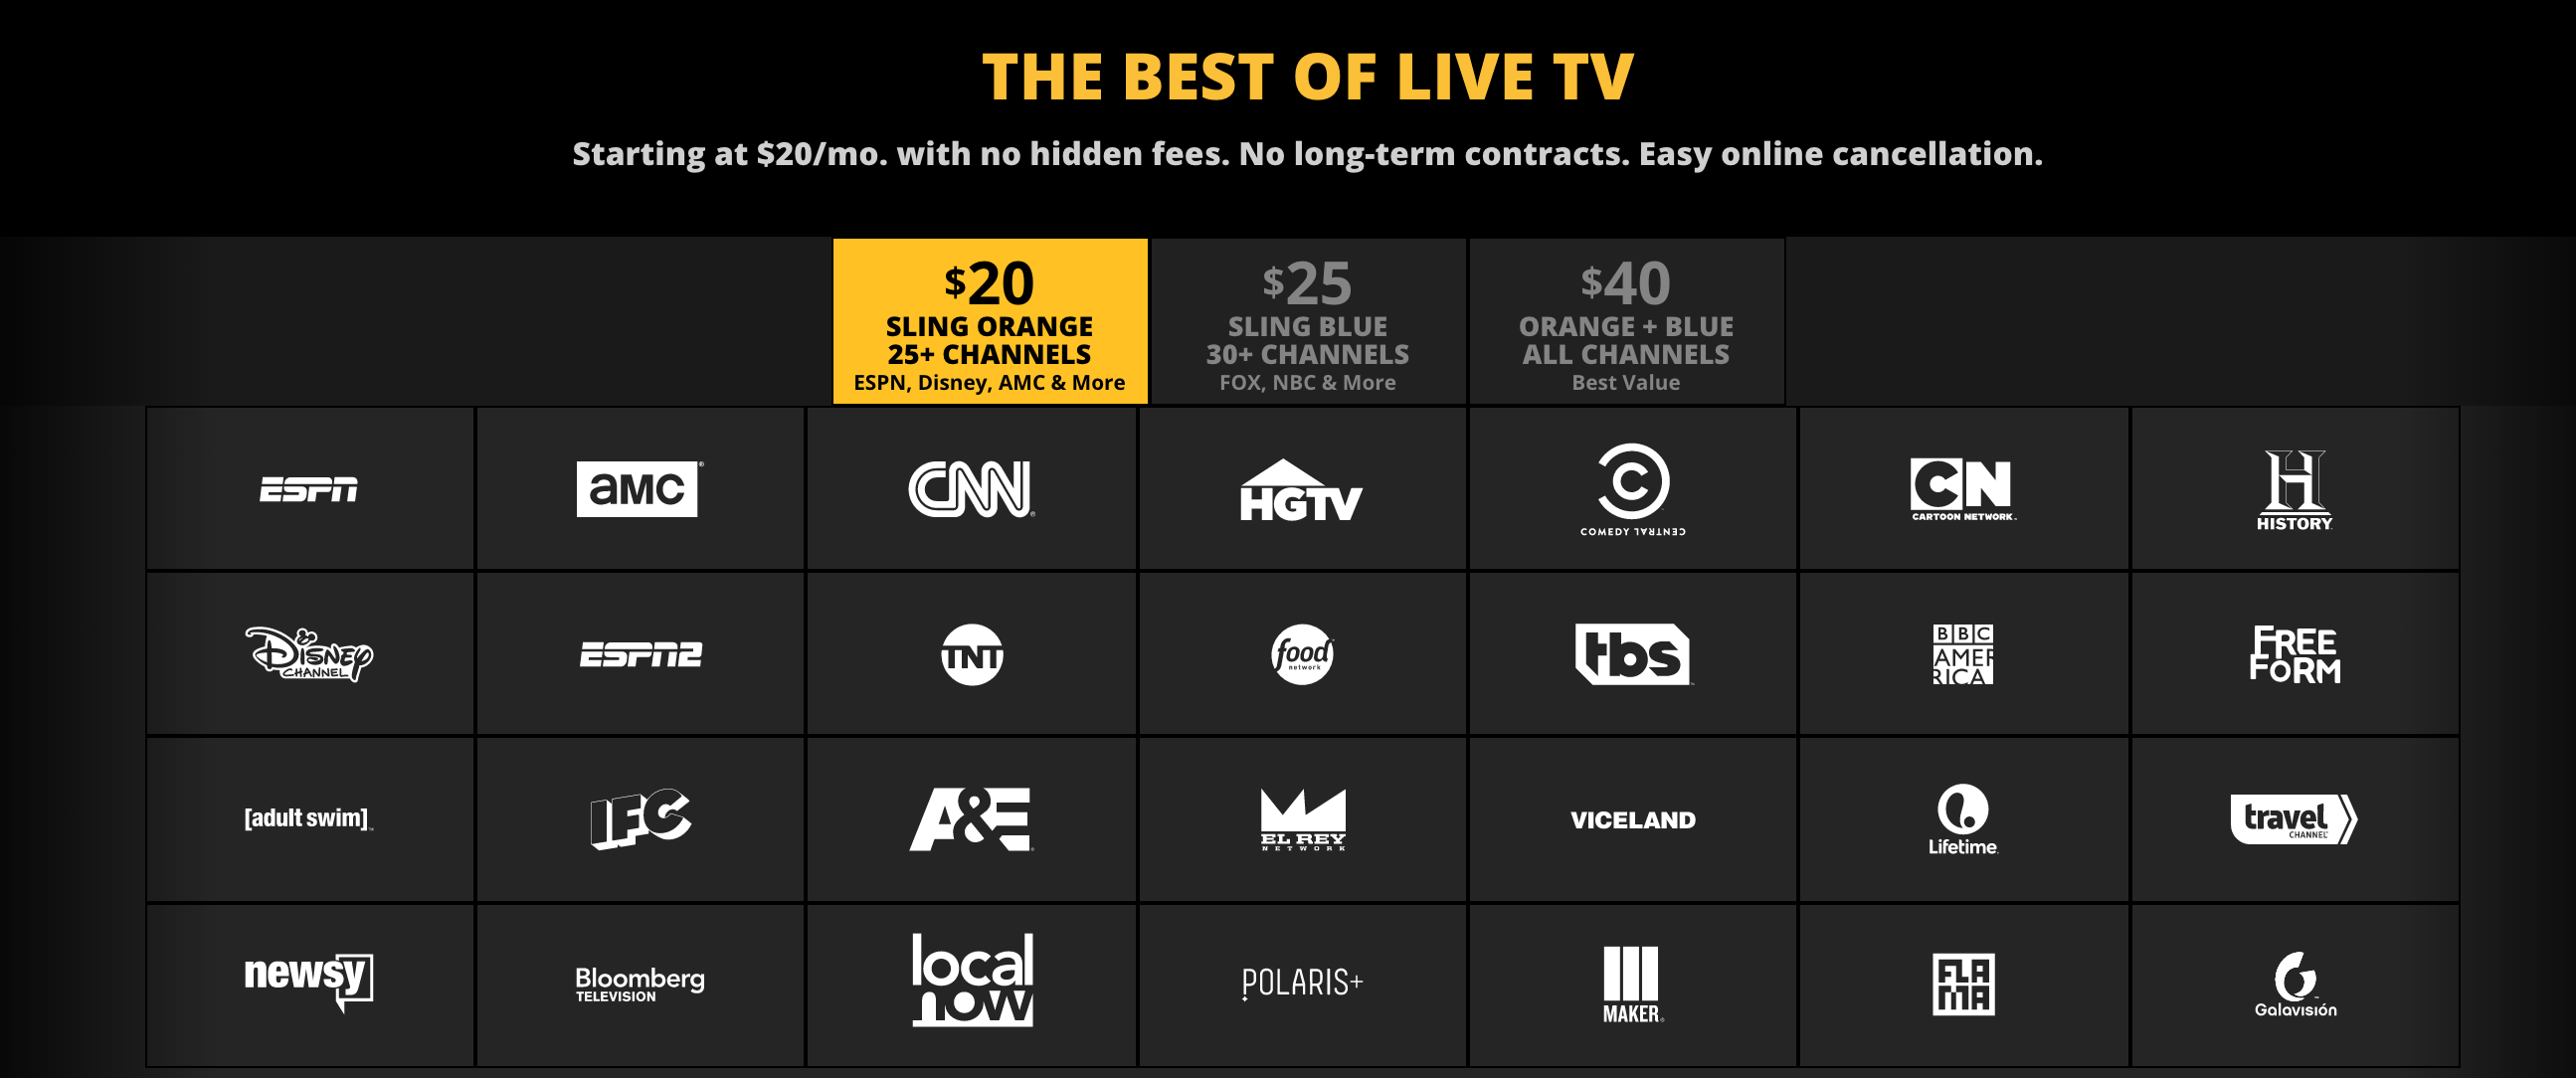 Sling TV announces new multistream packages plus NBC channels ahead of